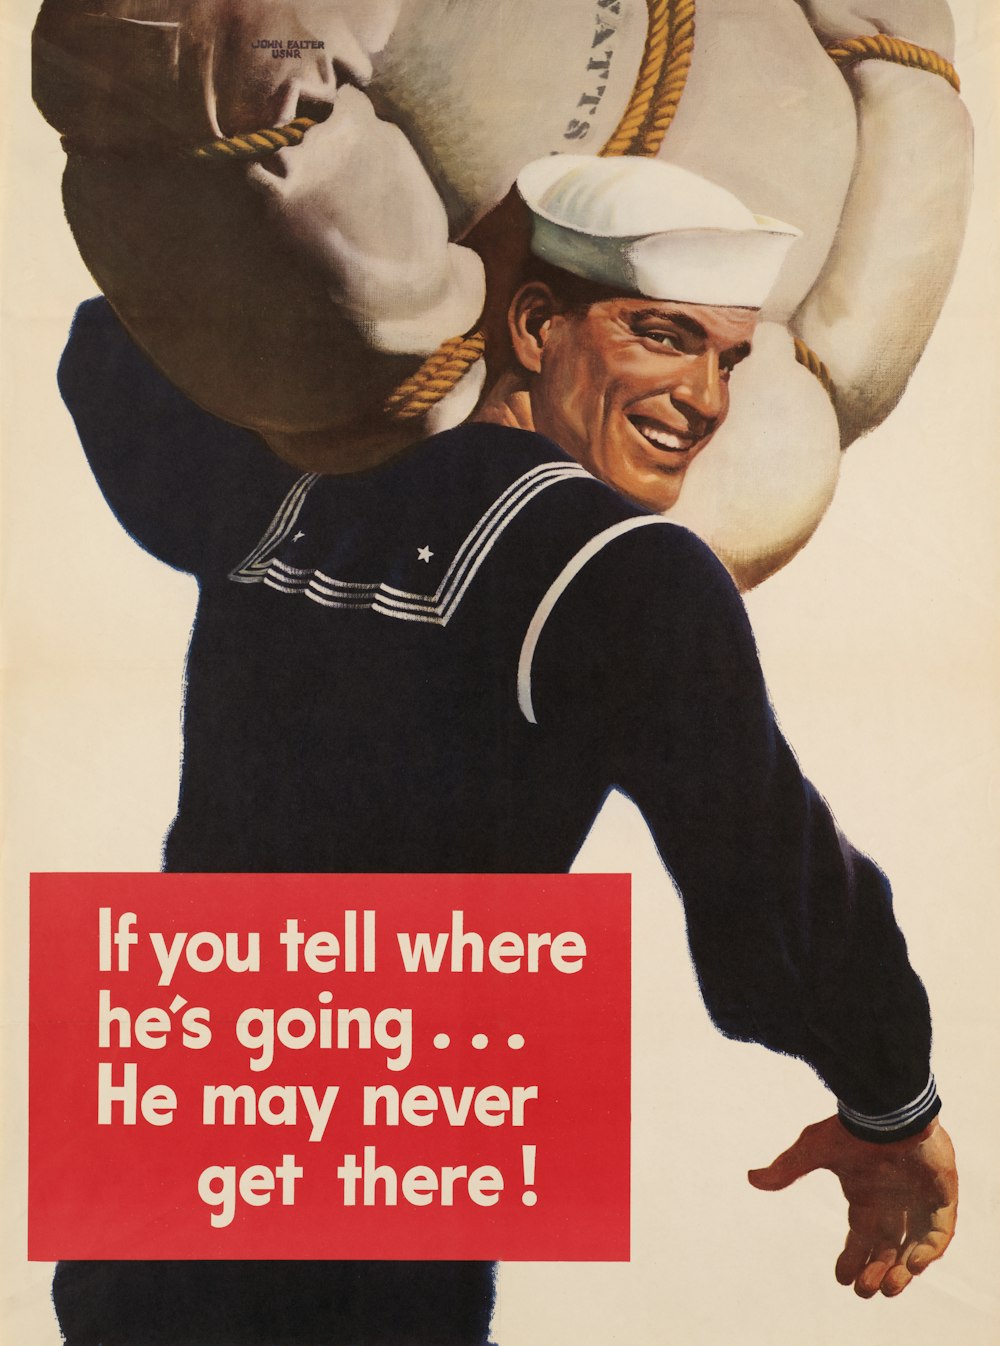 a man in a sailor's uniform carrying a large bag